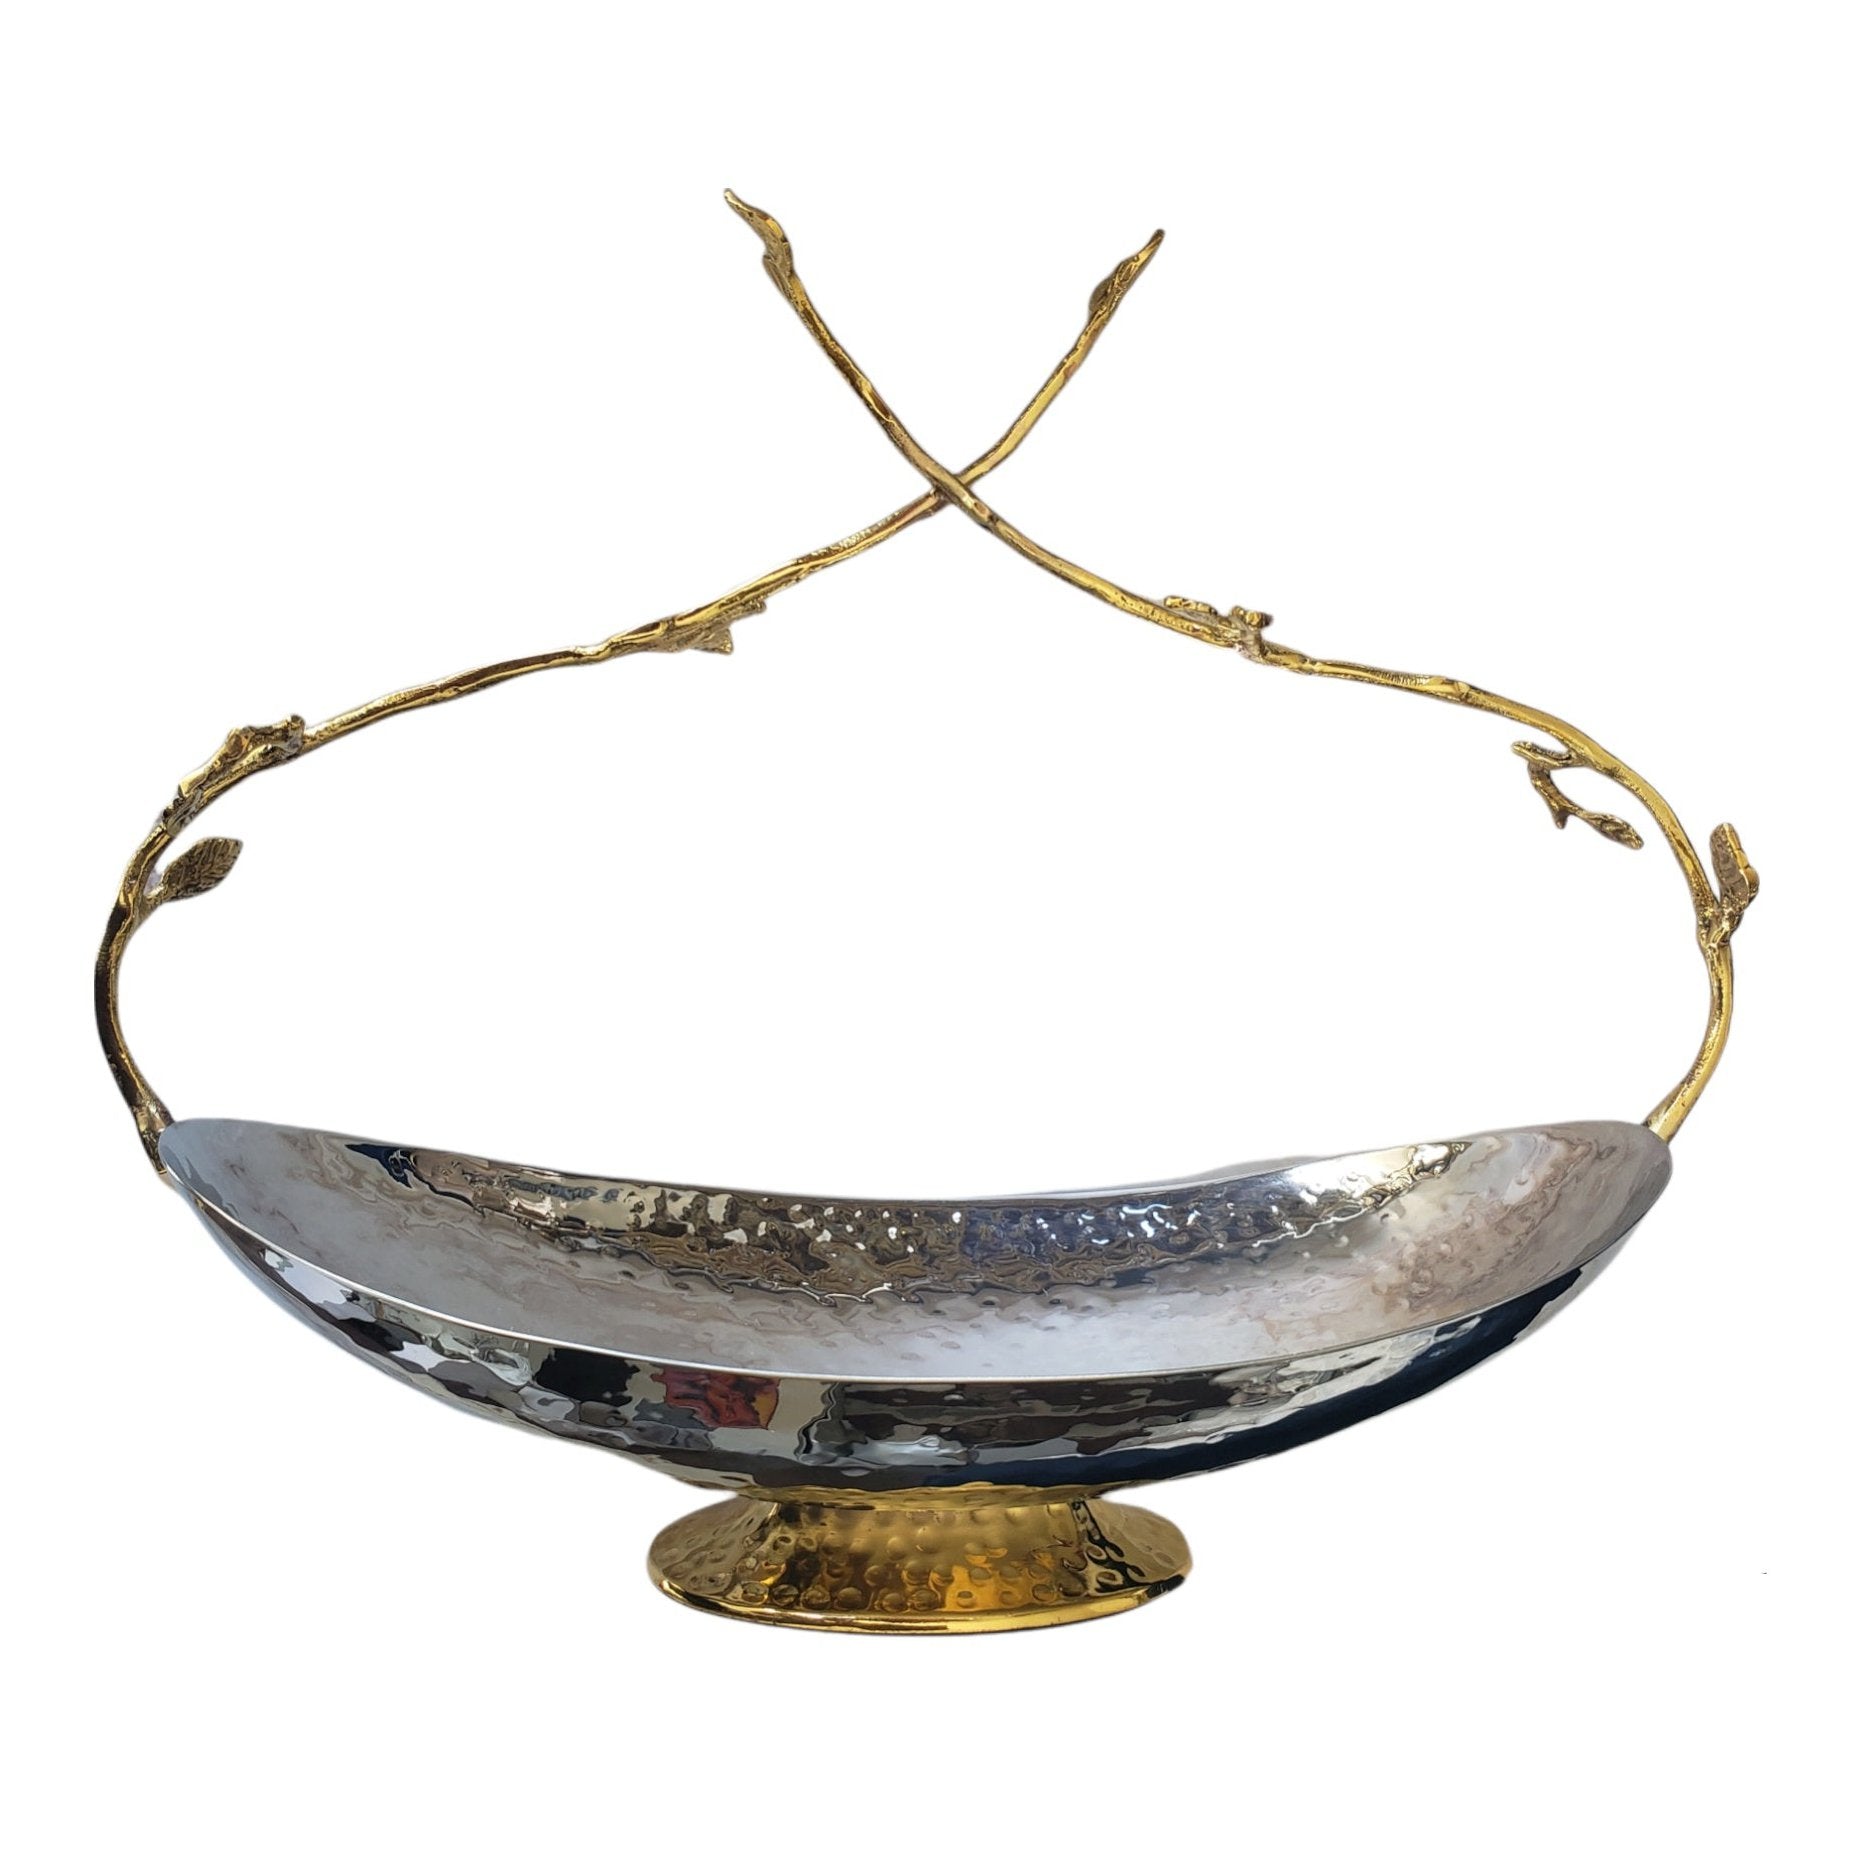 Stainless Steel Basket With Gold Twig Handle - Exquisite Designs Home Décor 